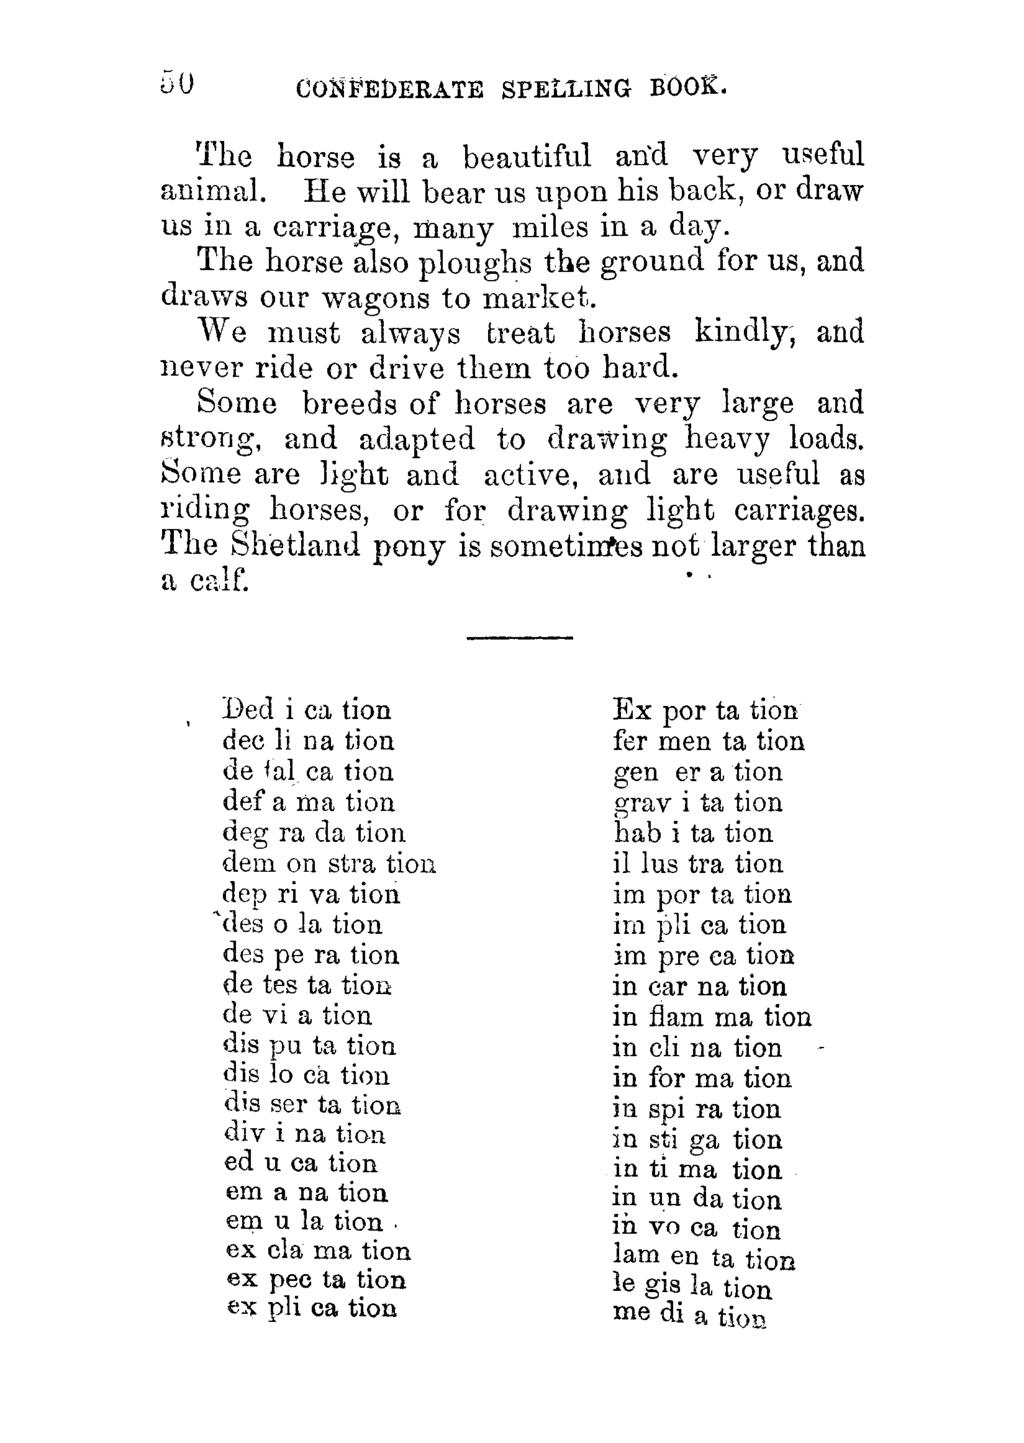 0 CONFEDERATE SPELLING BOOK. The horse is a beautiful and very useful animal. He will bear us upon his back, or draw us in a carriage, many miles in a day.